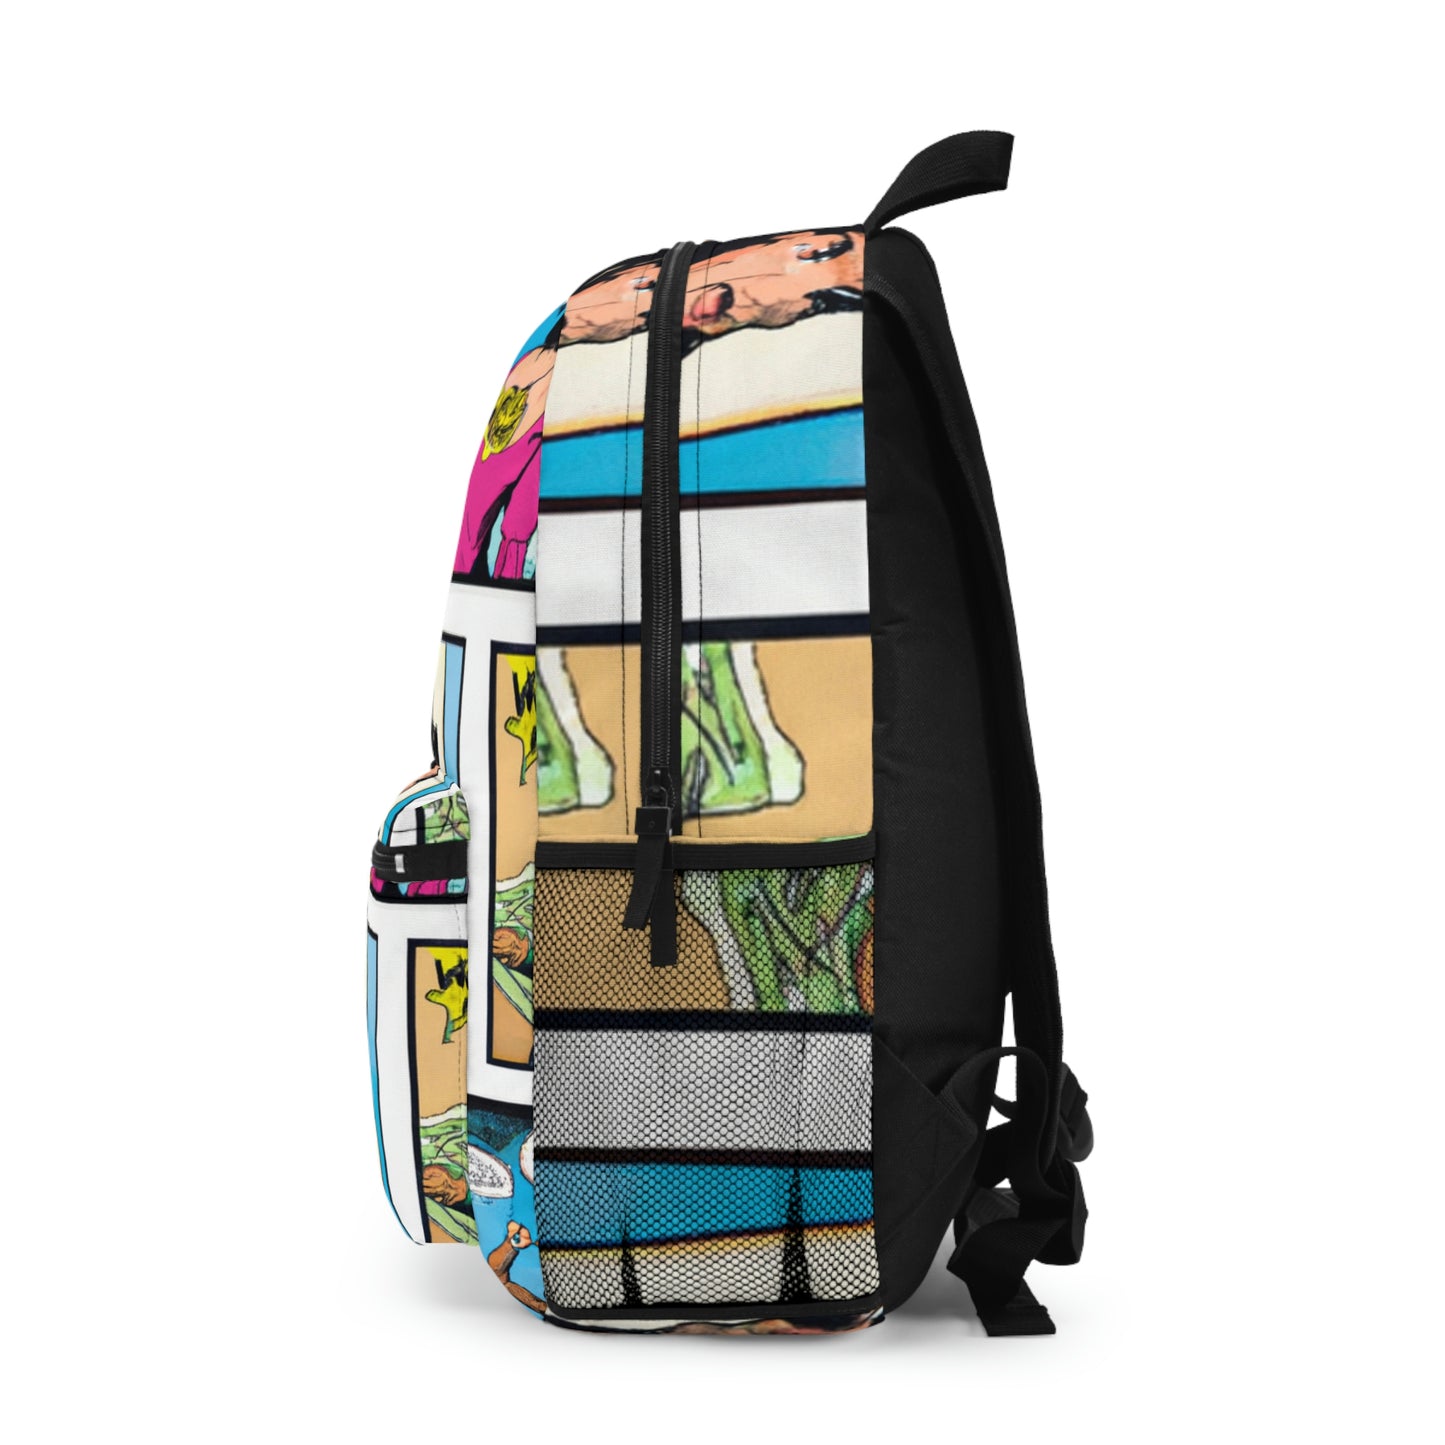 Sparkfly Man - Comic Book Backpack